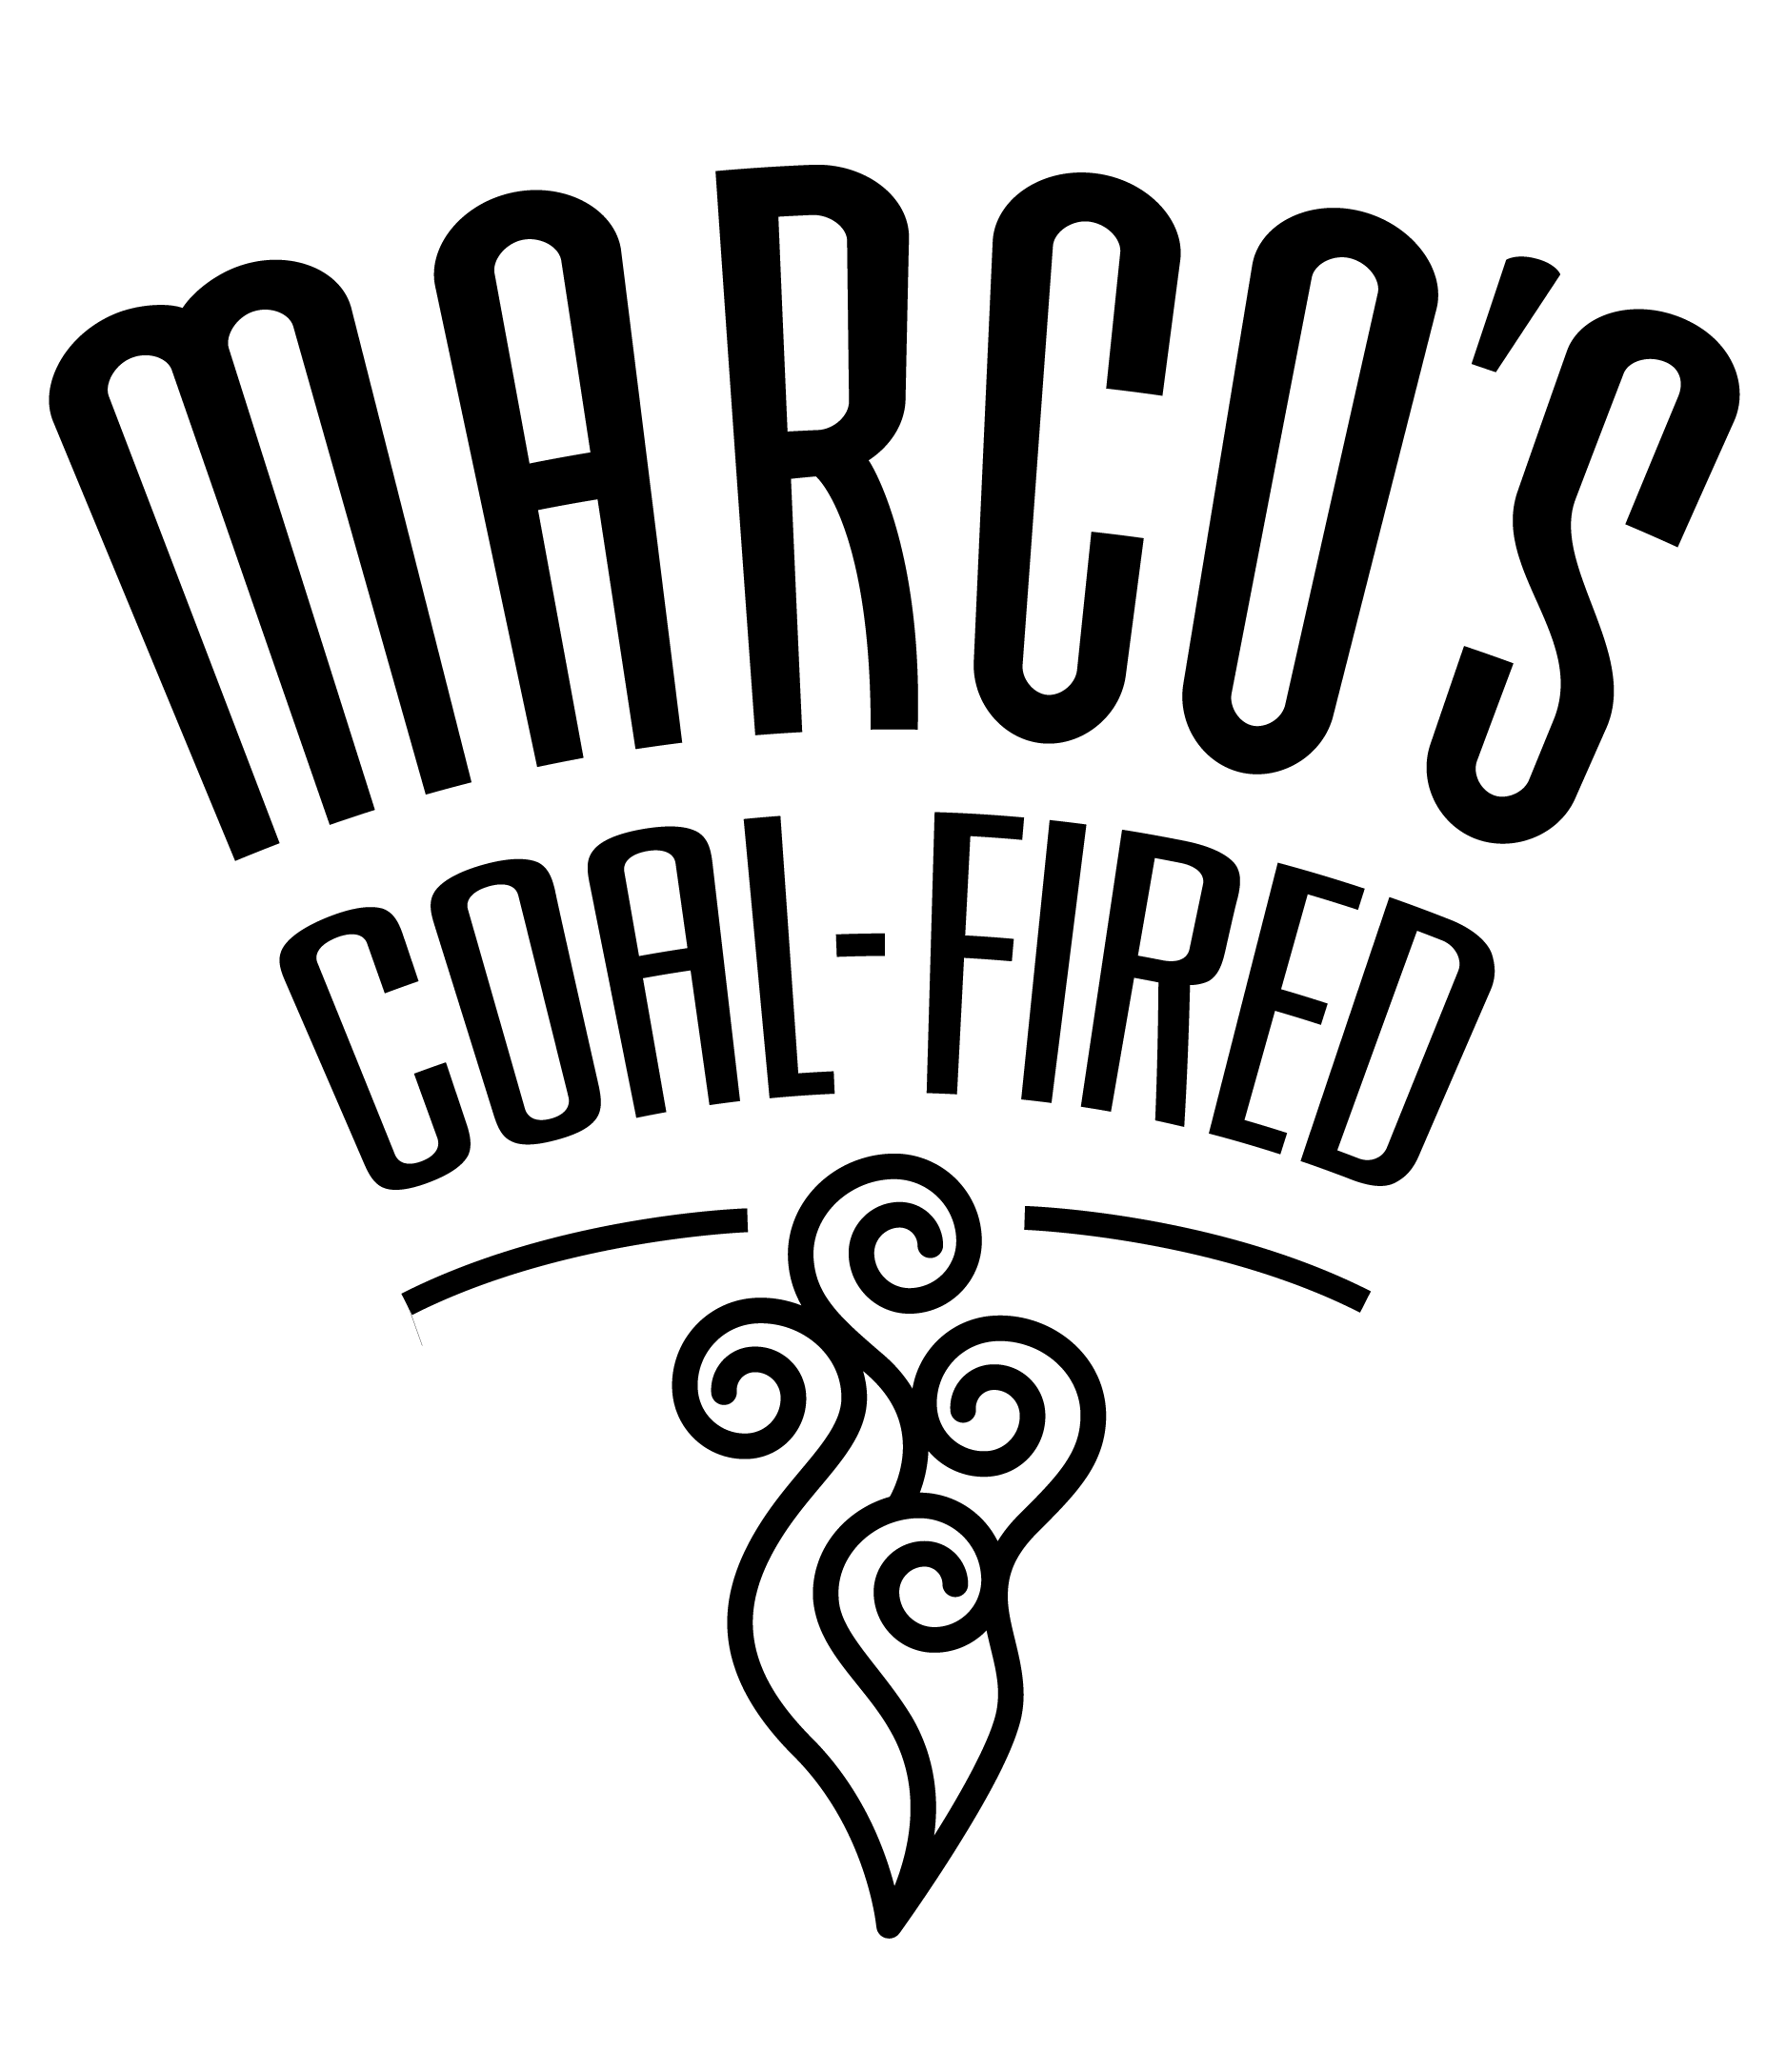 MCFP LOGO ALL BLACK- Marco's Coal Fired-02.png